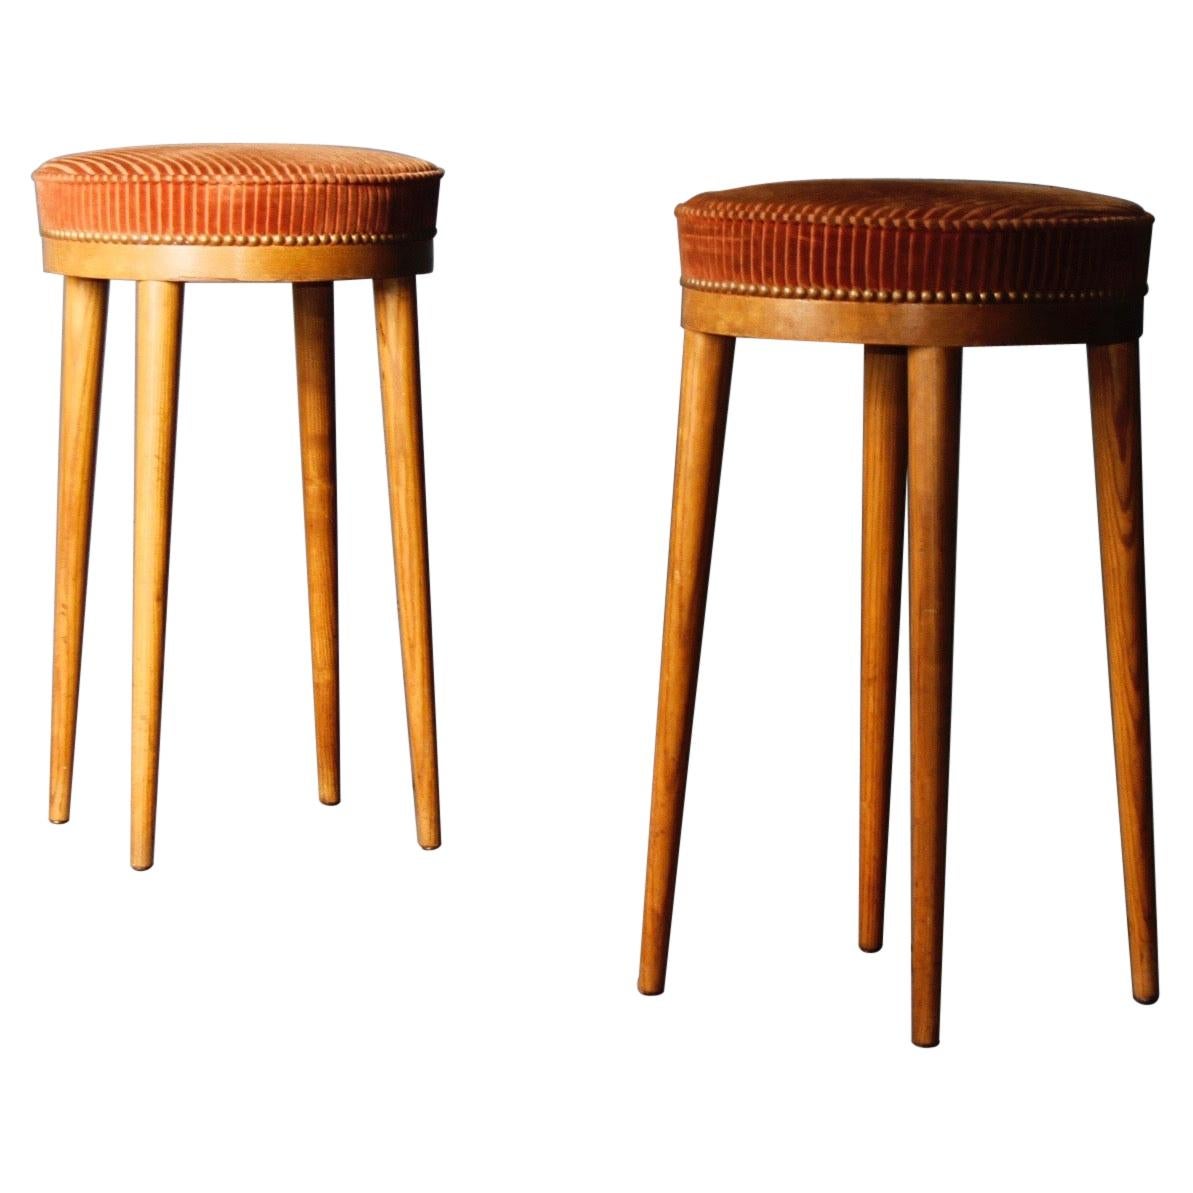 Pair of Wood and Fabric Stools